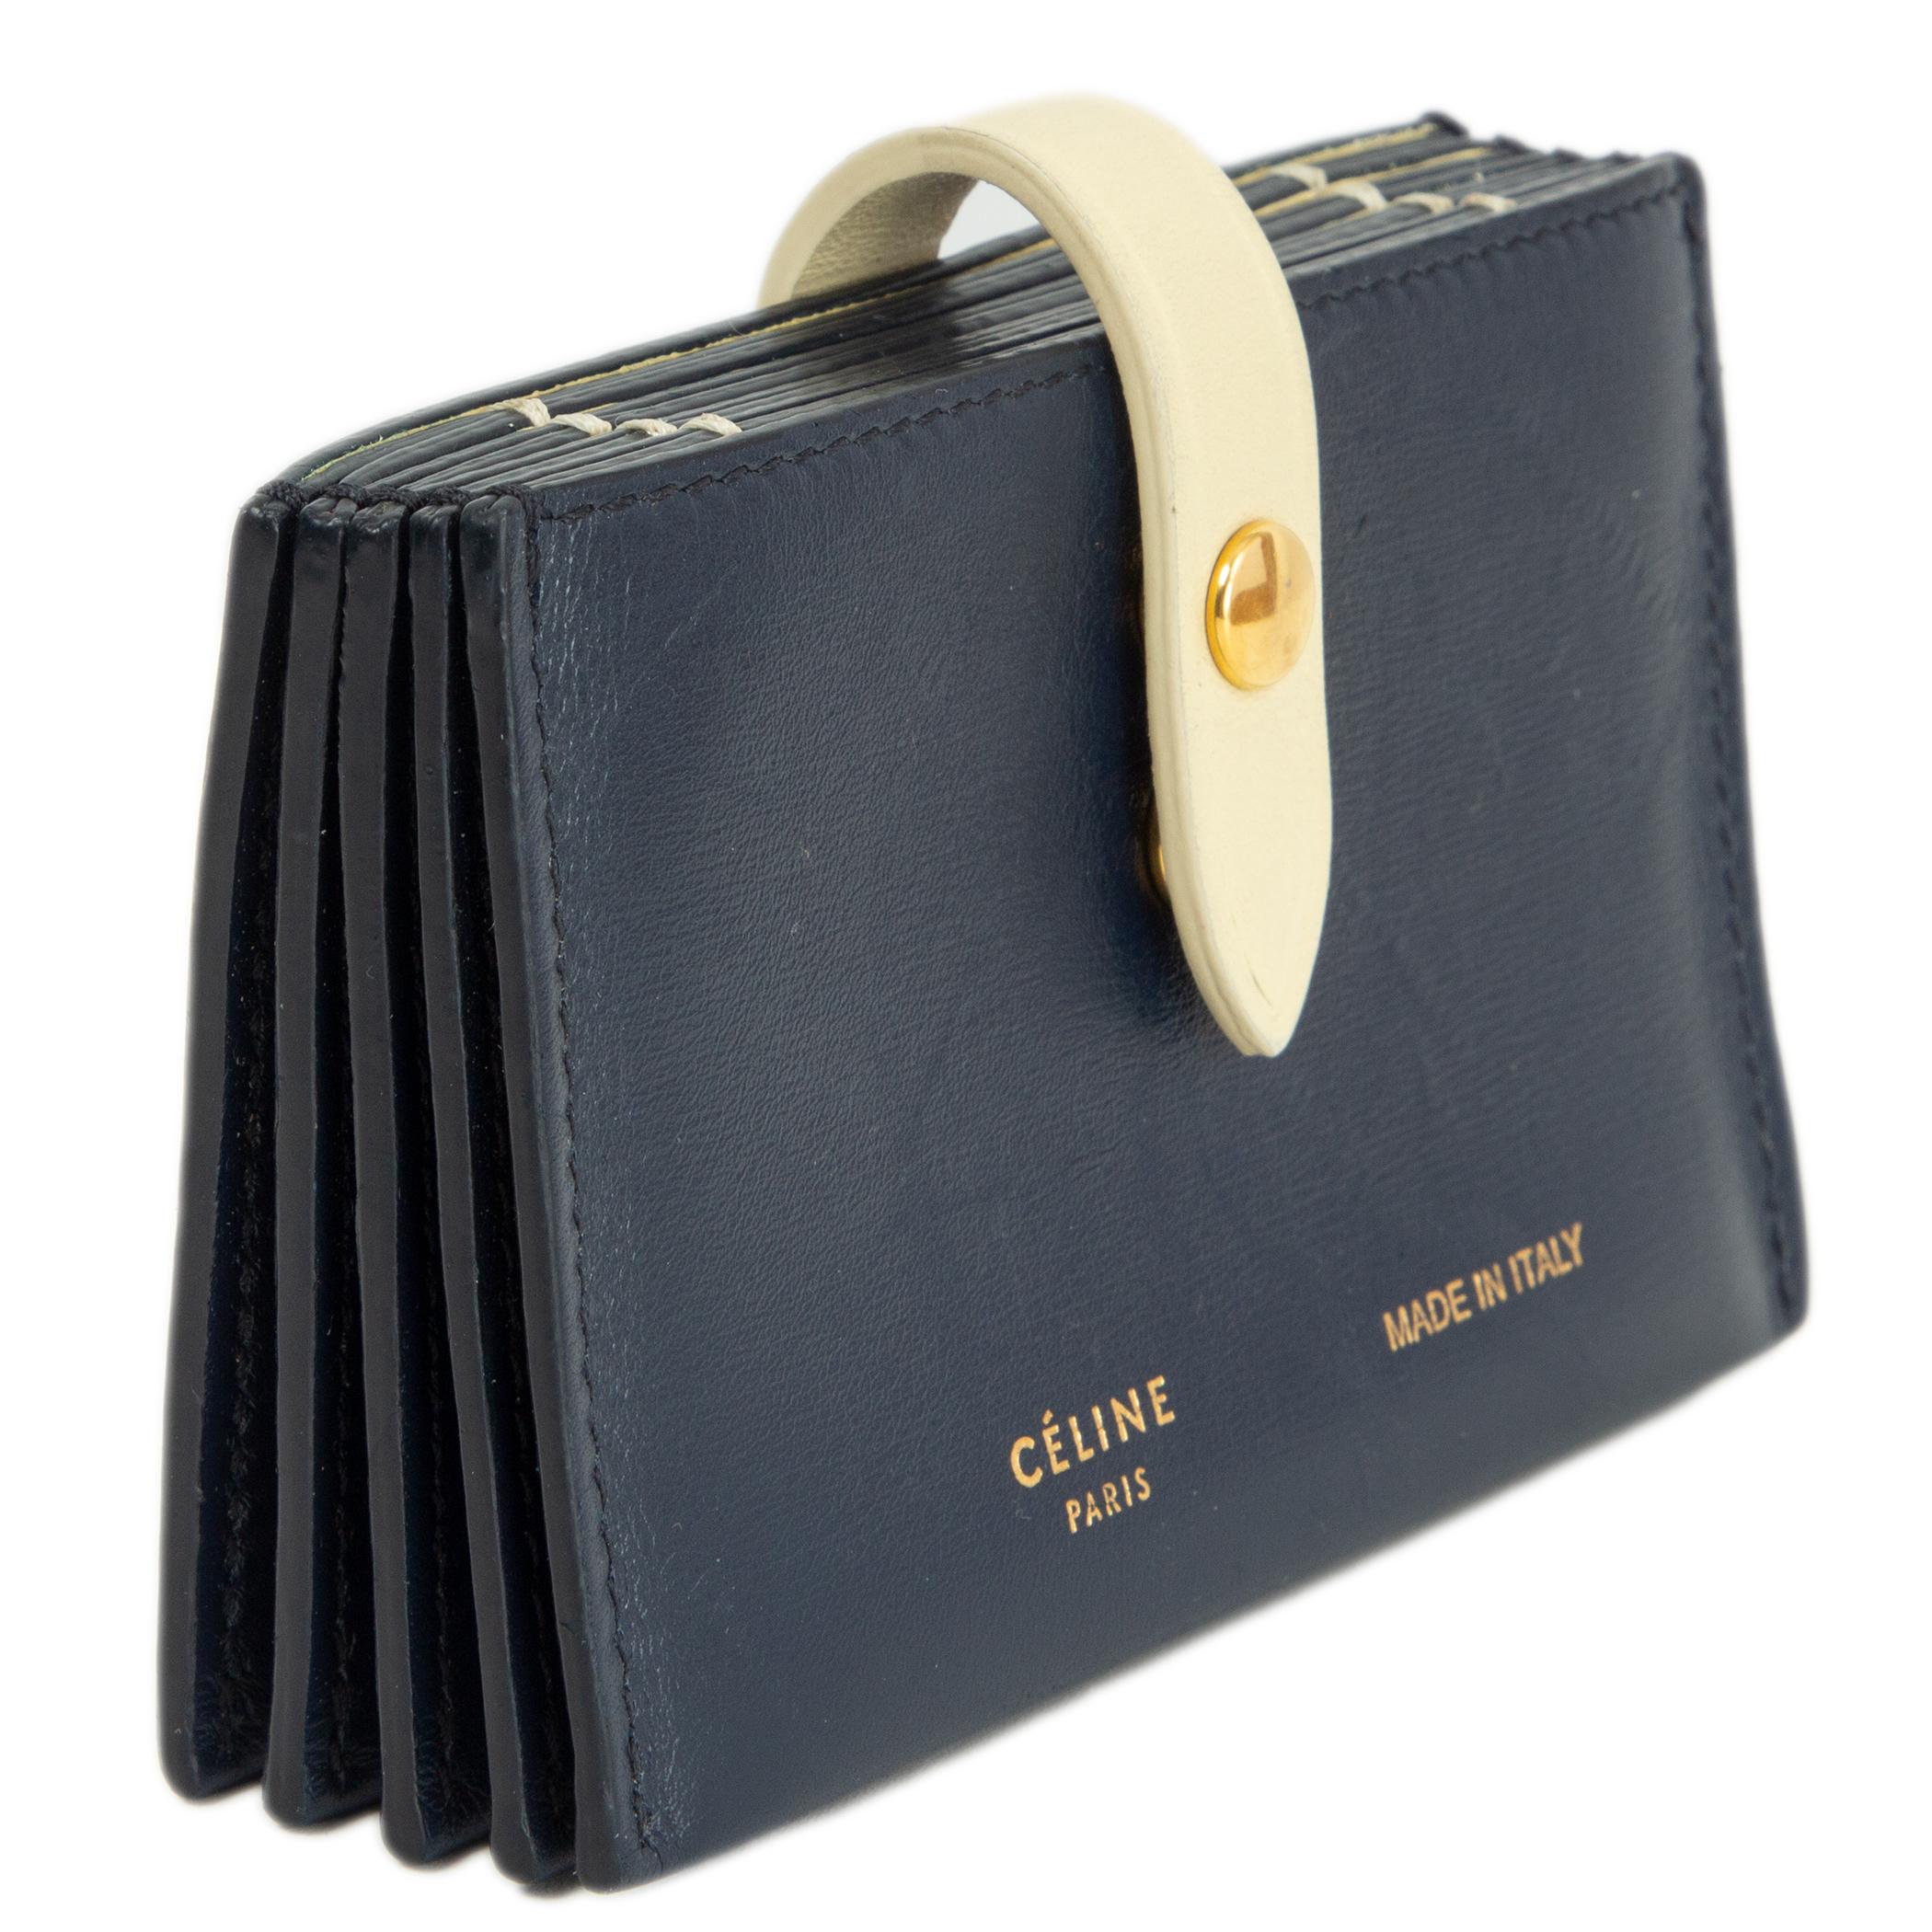 100% authentic Céline card holder in navy blue and vanilla calfskin. Opens with a push button and comes with 5 credit card slots. (each slot fits more than 1 card.) Has been carried and shows some scratches at the front and back. Overall in good